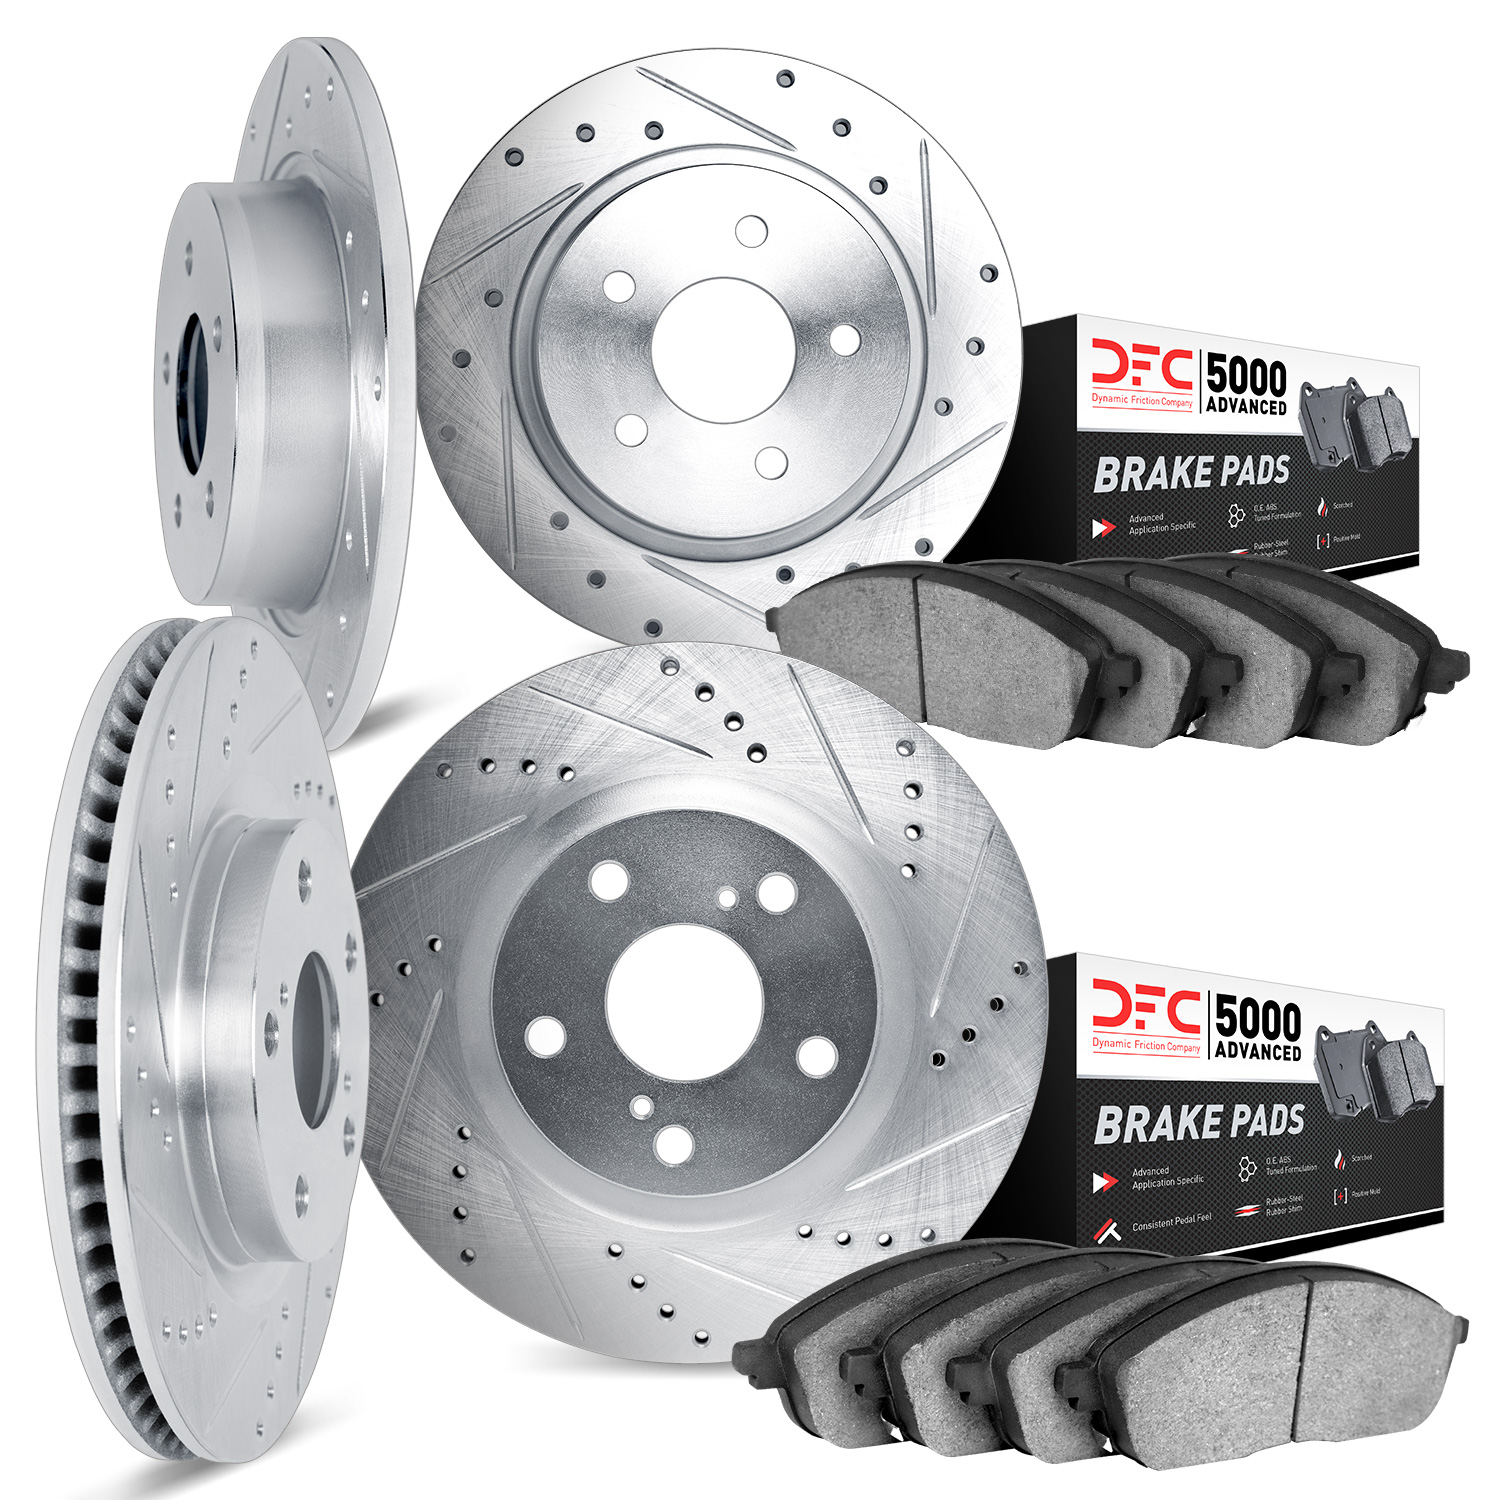 7504-59049 Drilled/Slotted Brake Rotors w/5000 Advanced Brake Pads Kit [Silver], 2002-2004 Acura/Honda, Position: Front and Rear